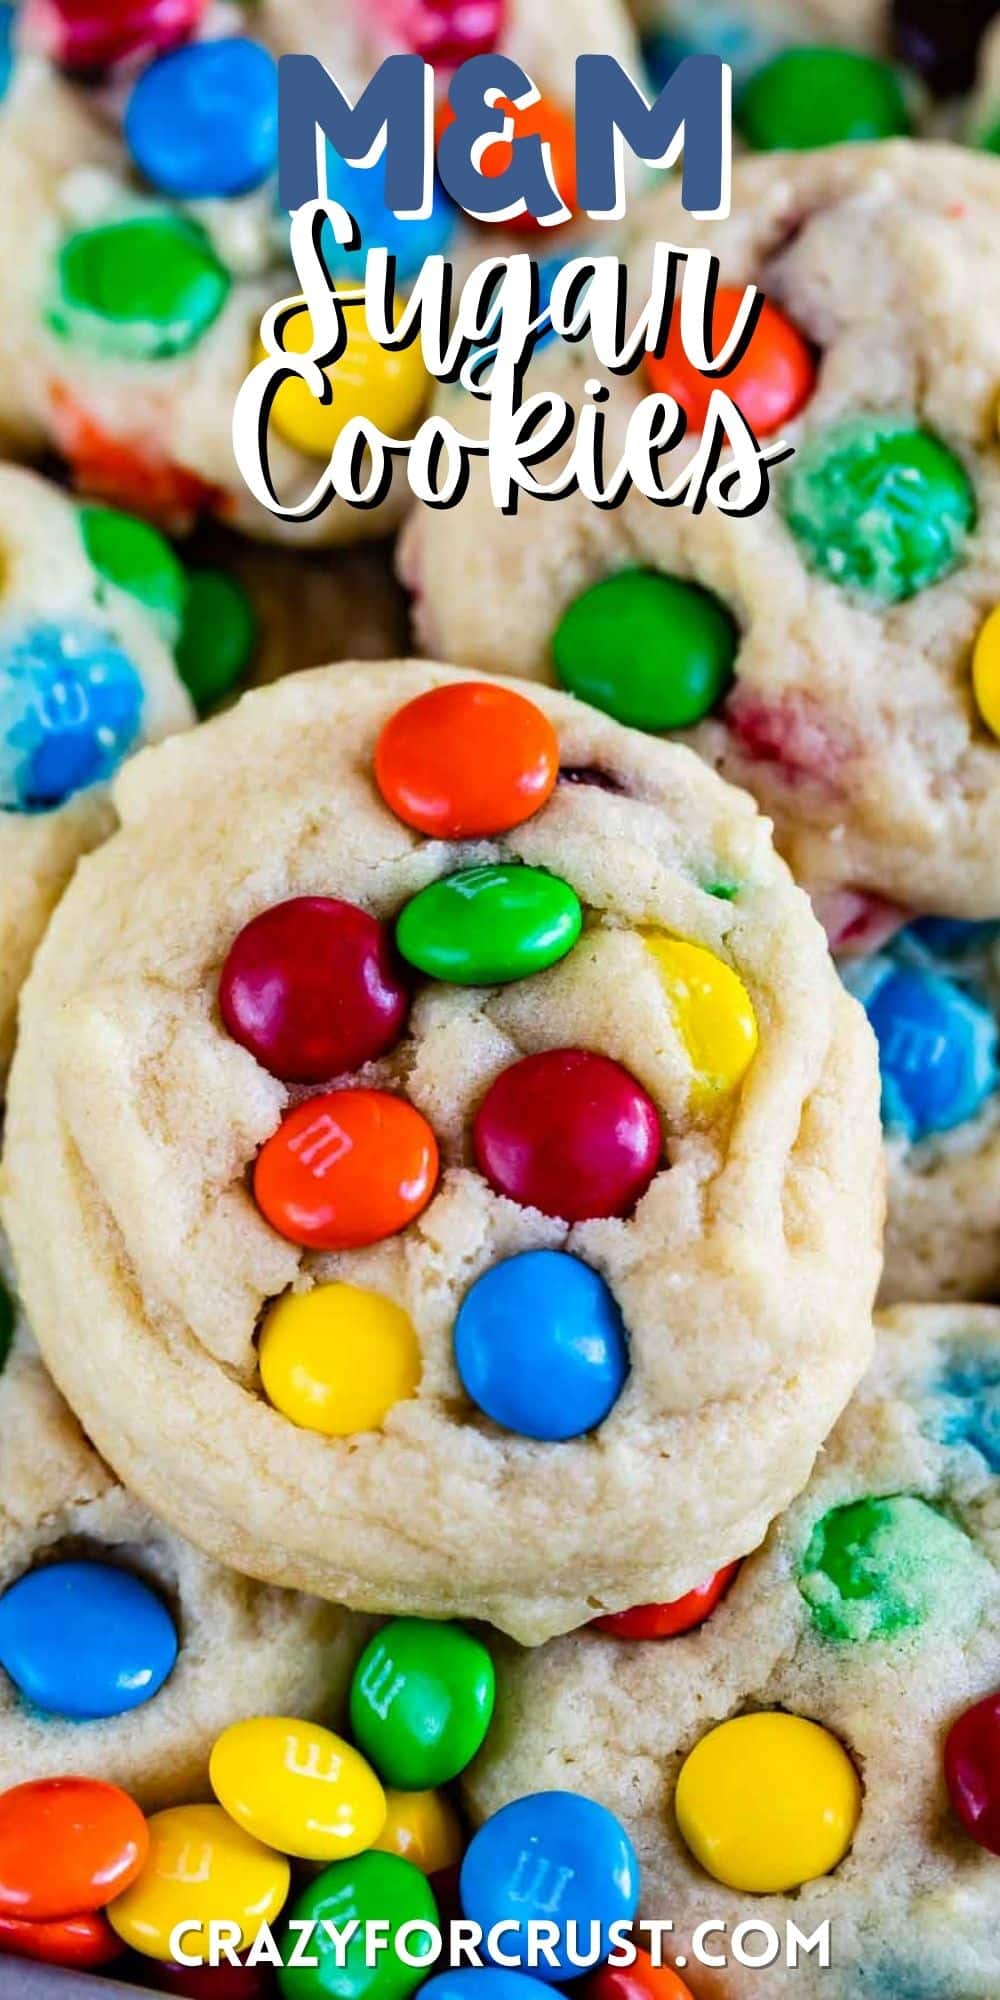 sugar cookie with colorful m&ms baked in with words on top of the image